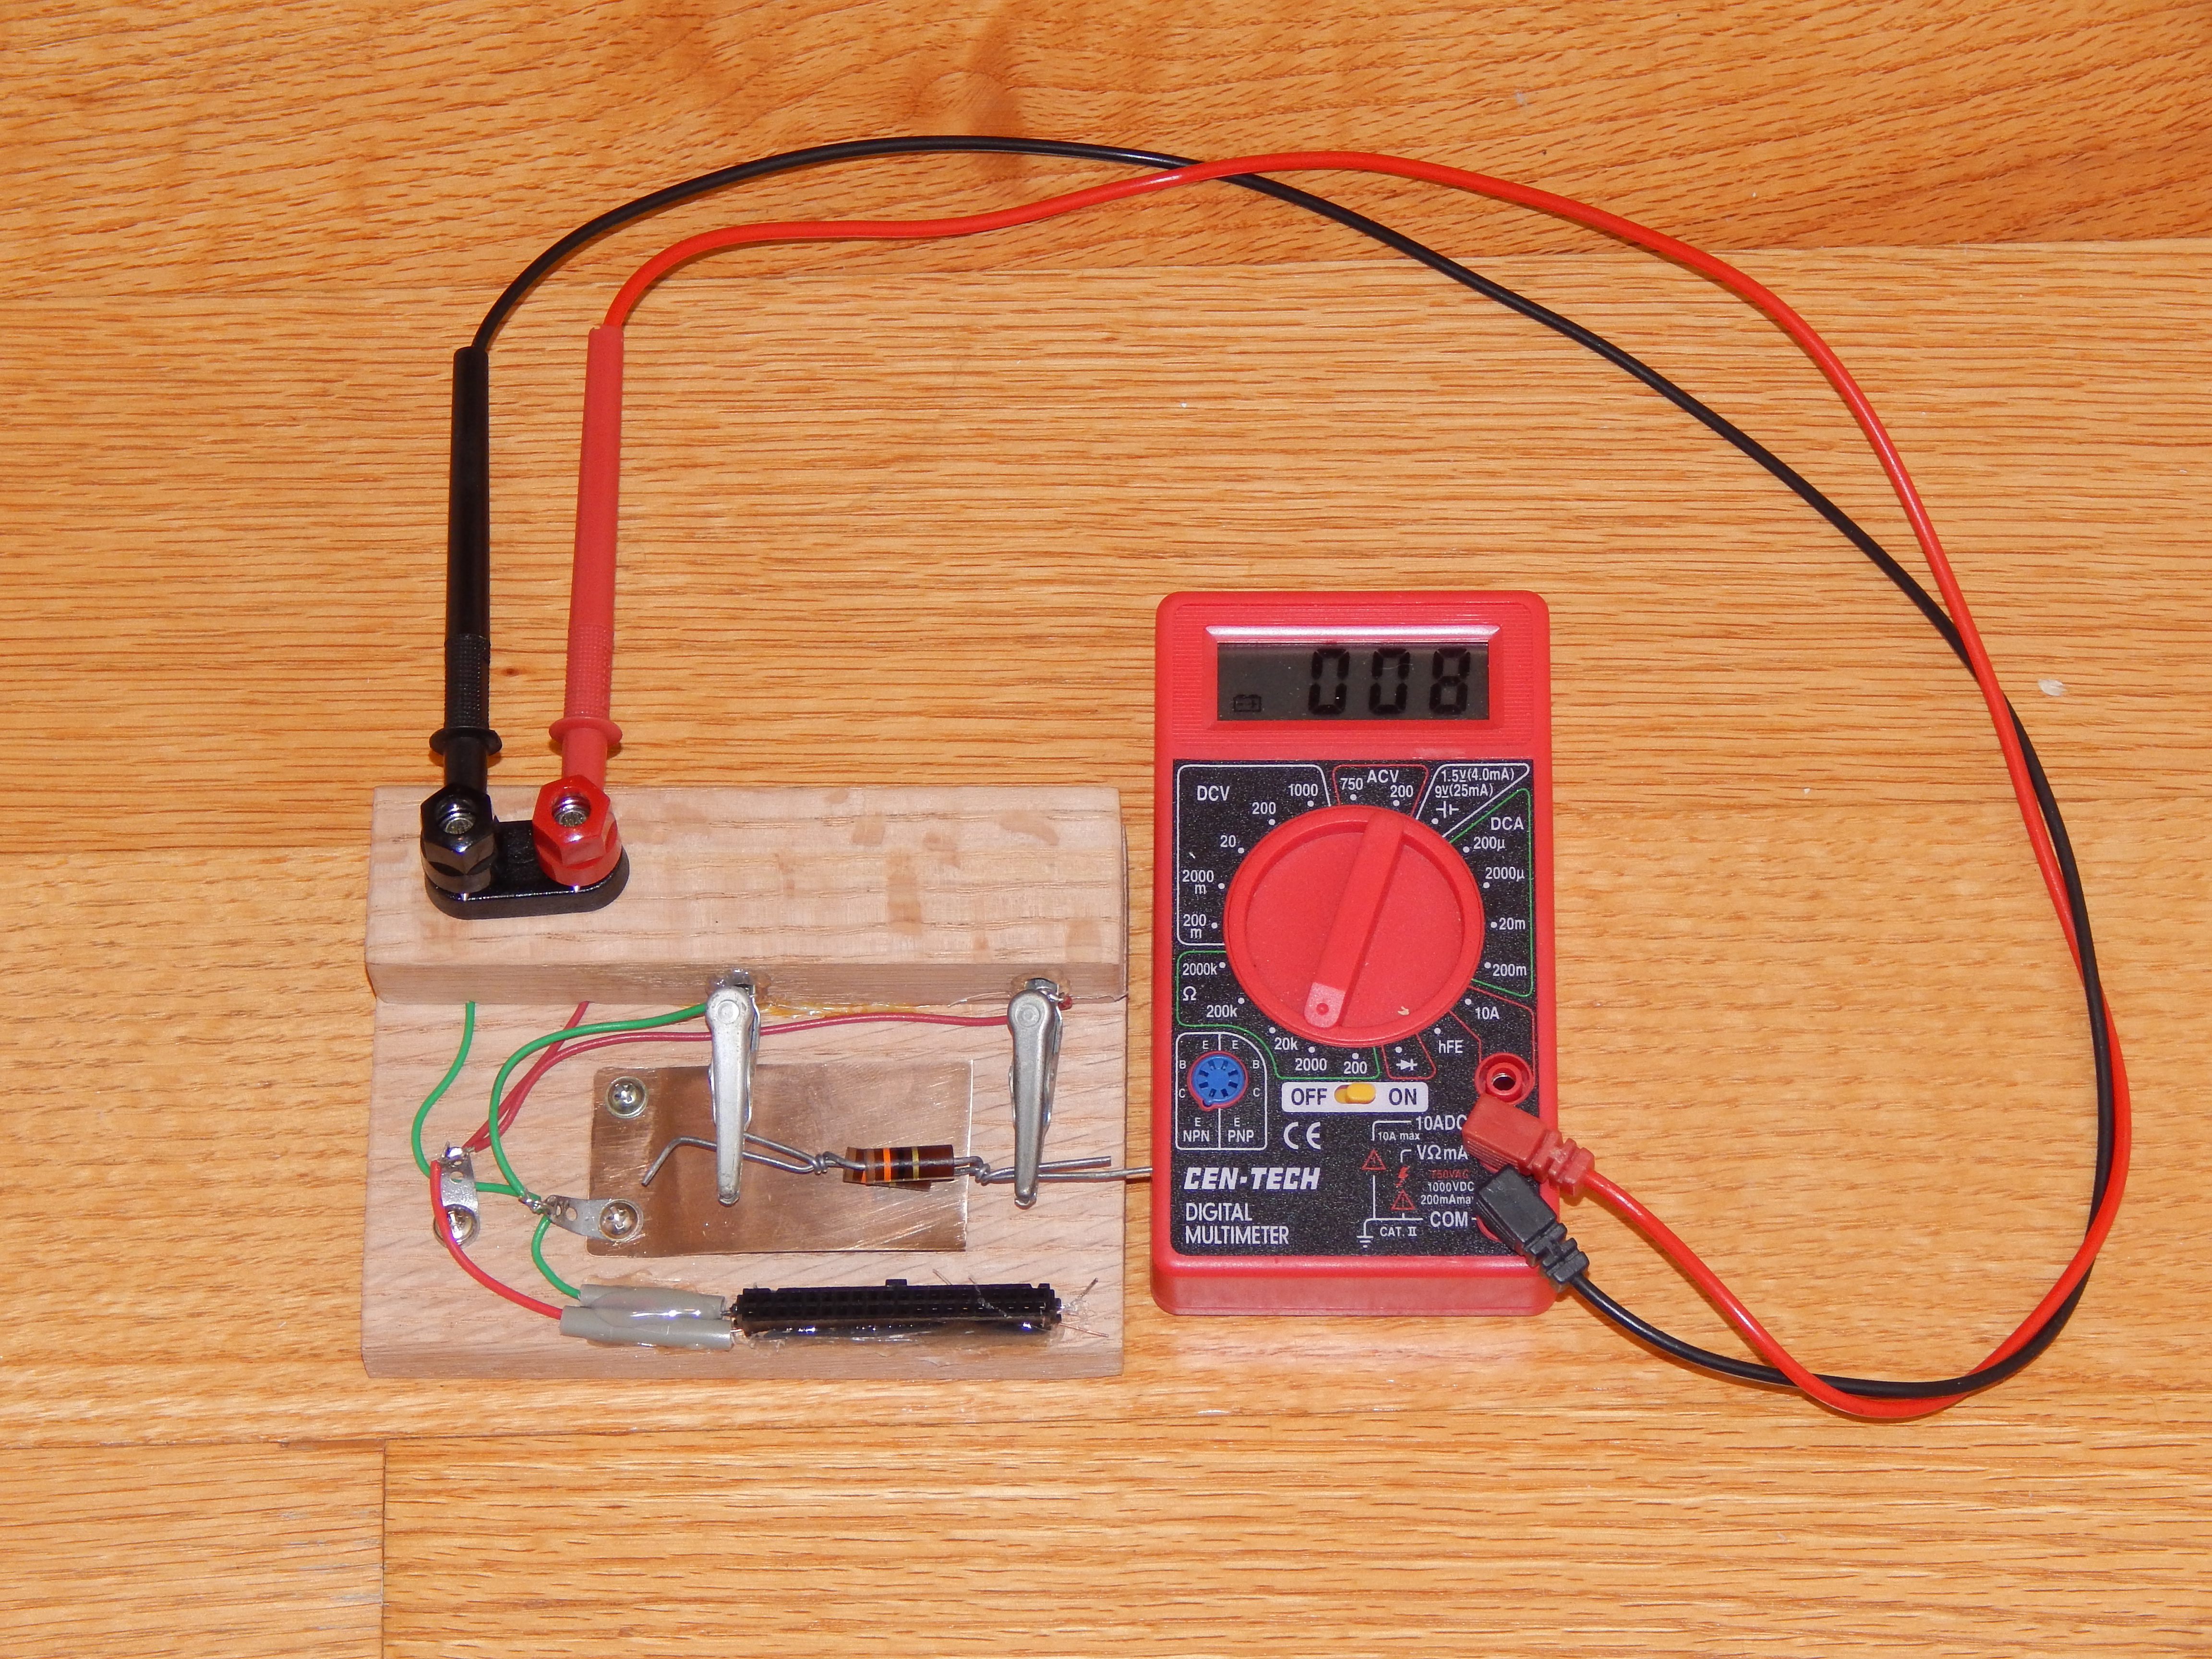 Third Hand for Your Multimeter